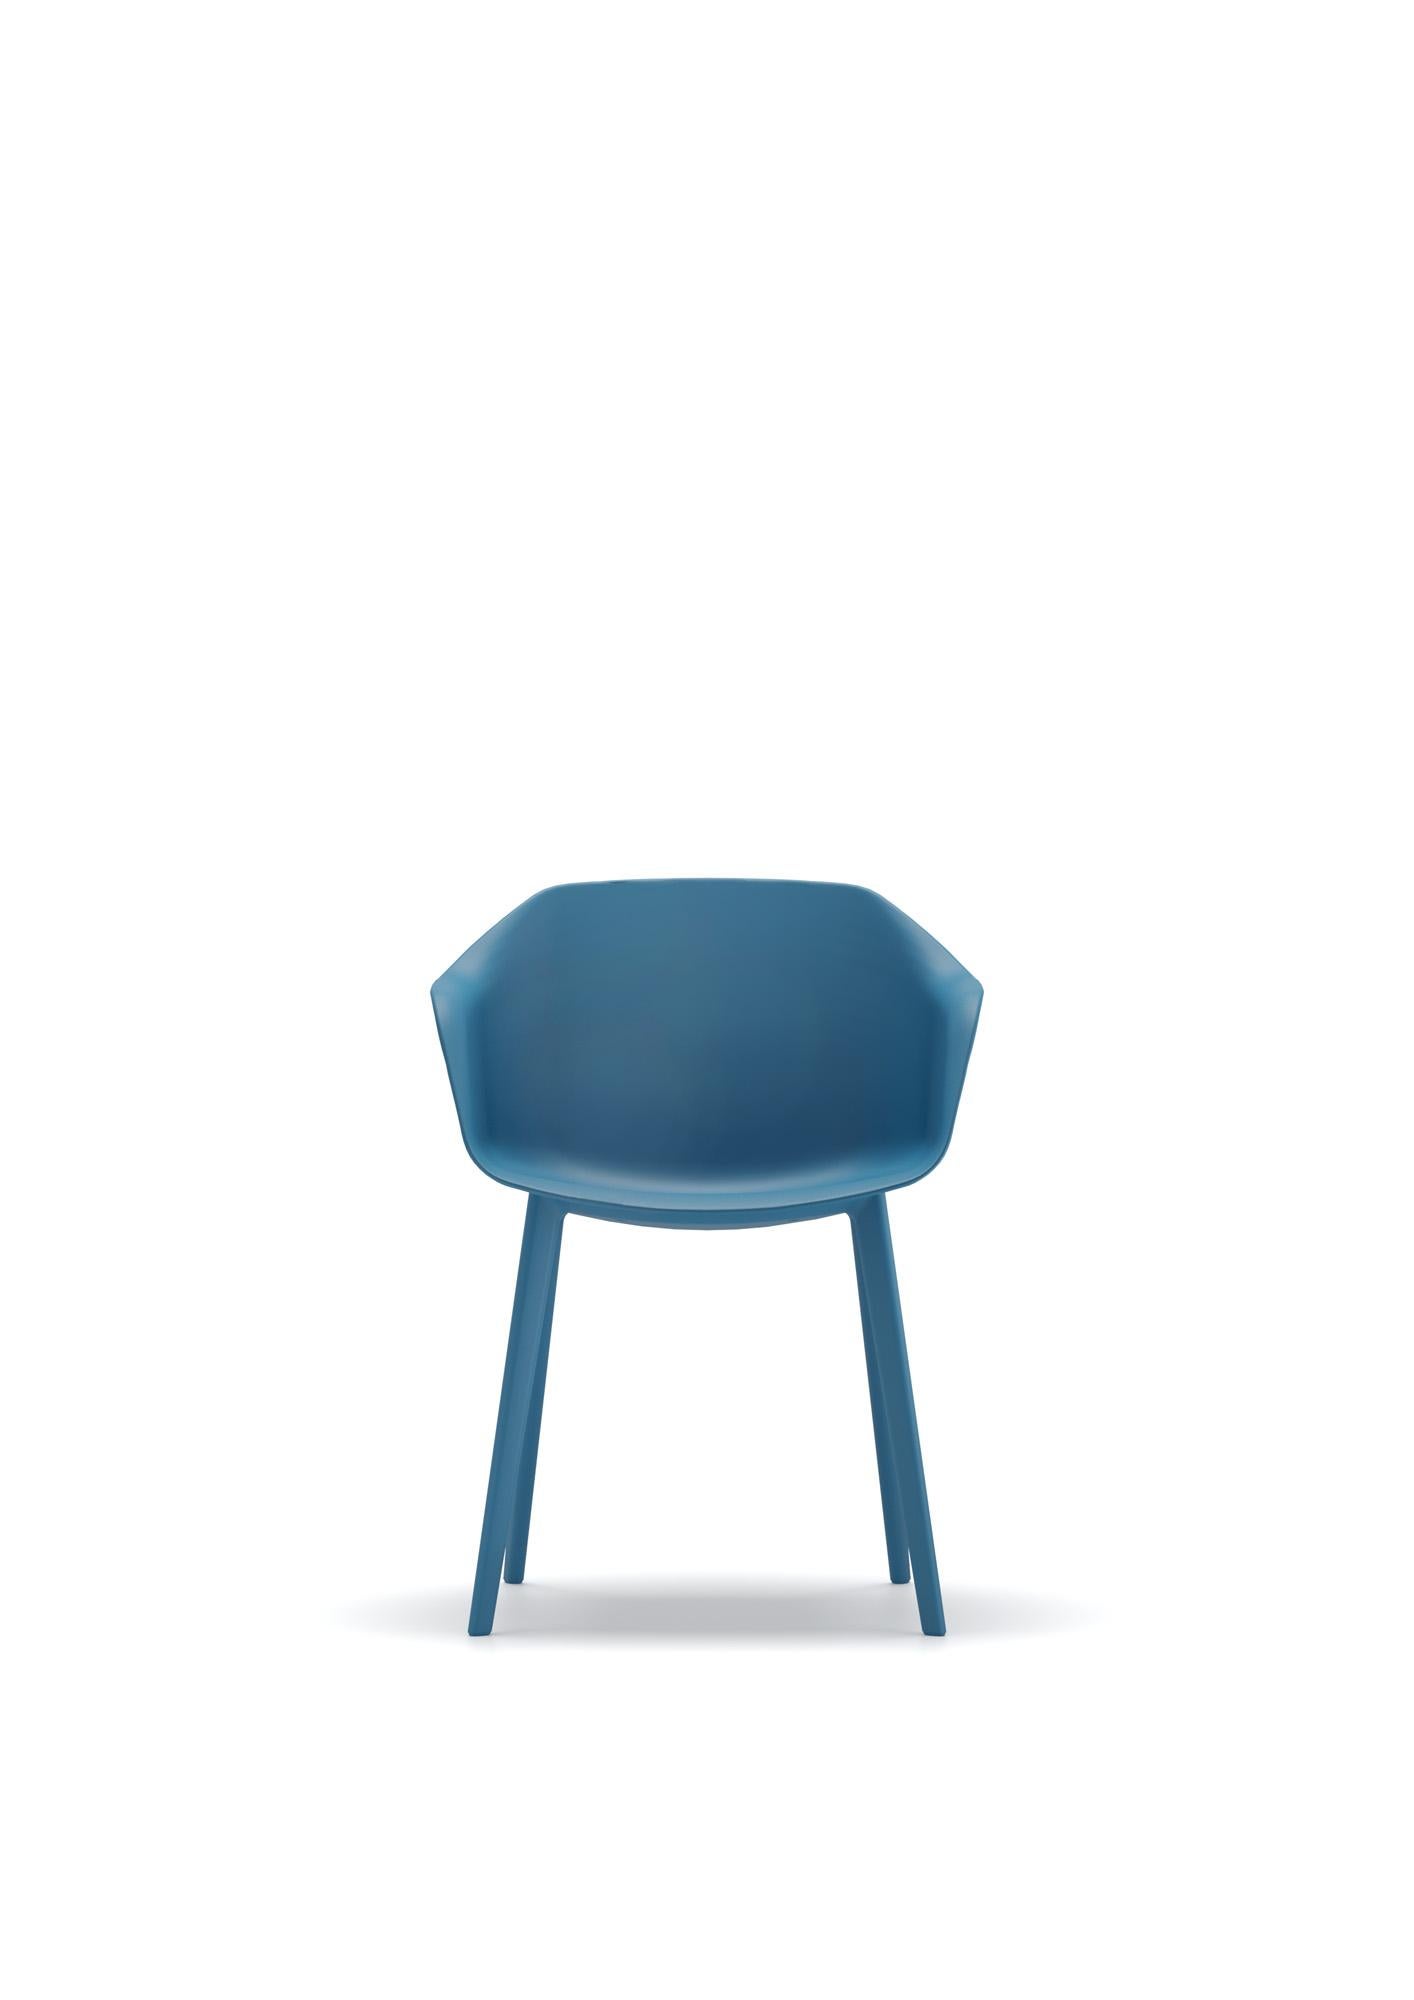 Armachair  in reinforced plastic, available in different colors and suitable for kitchens, bars or restaurants, very comfortable.
Colorful armchair with plastic frame that has passed the tests
required by EN 16139:2013 relating to